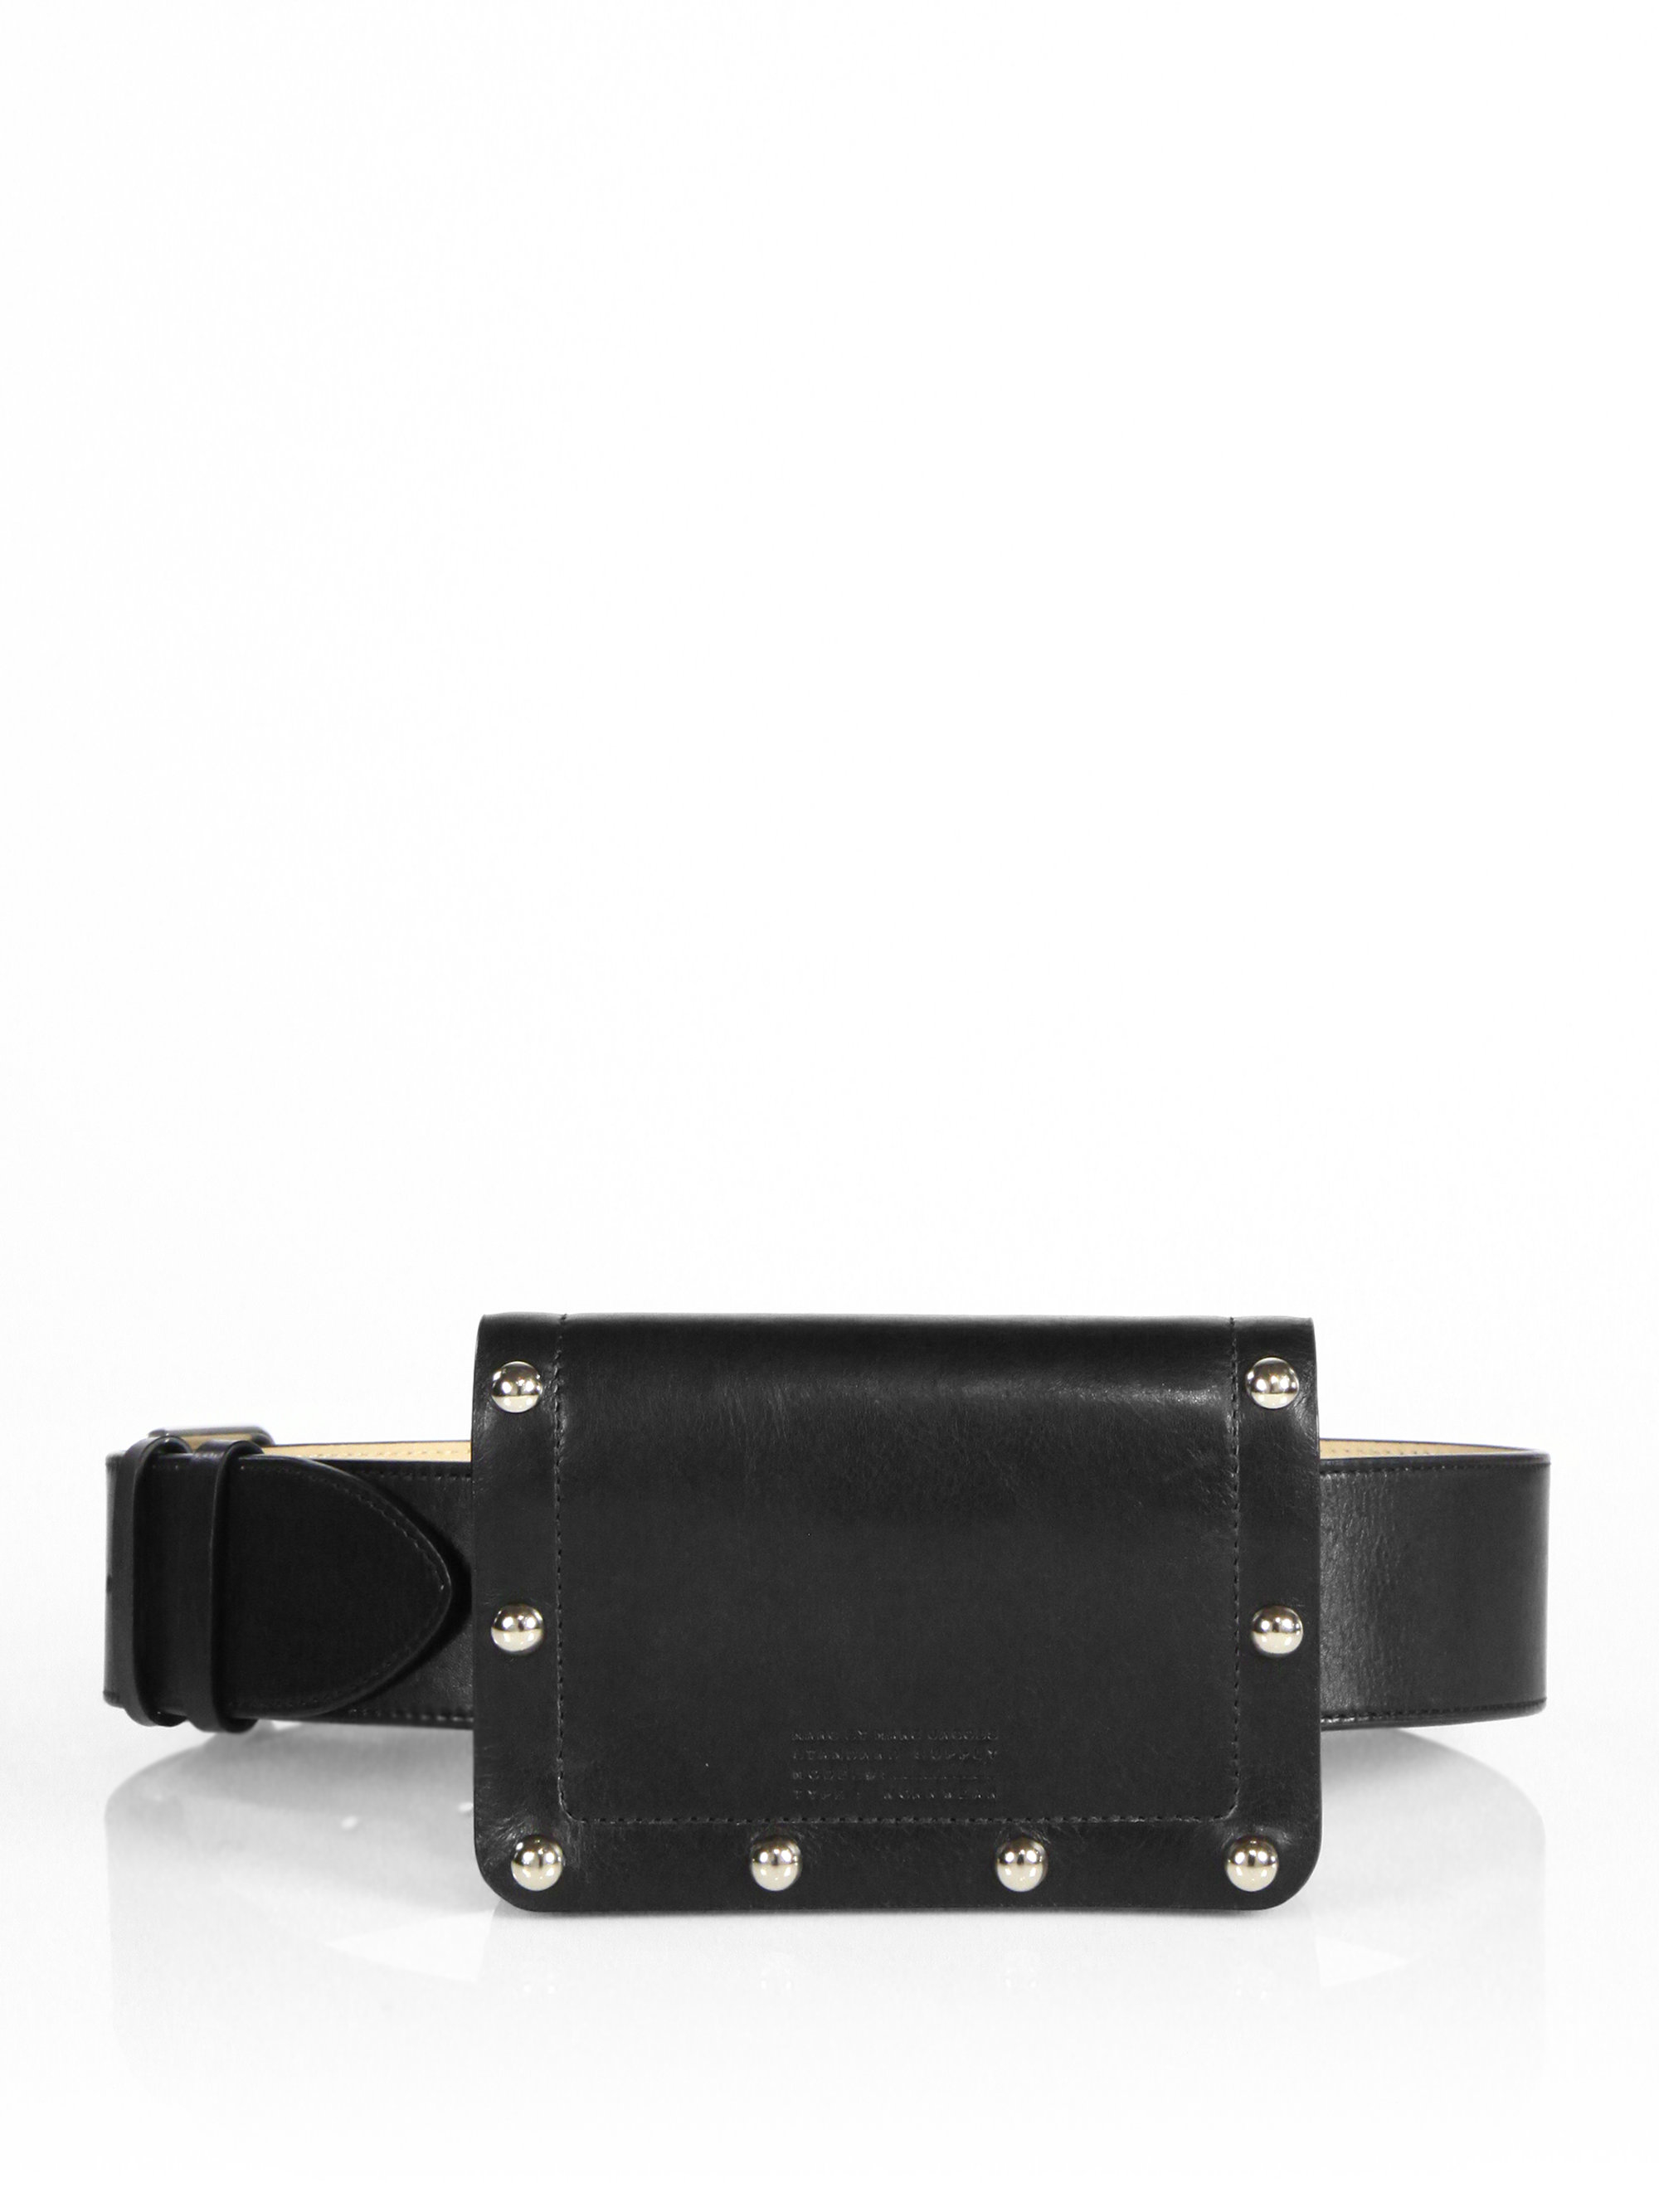 Lyst - Marc By Marc Jacobs Quintana Leather Belt Bag in Black